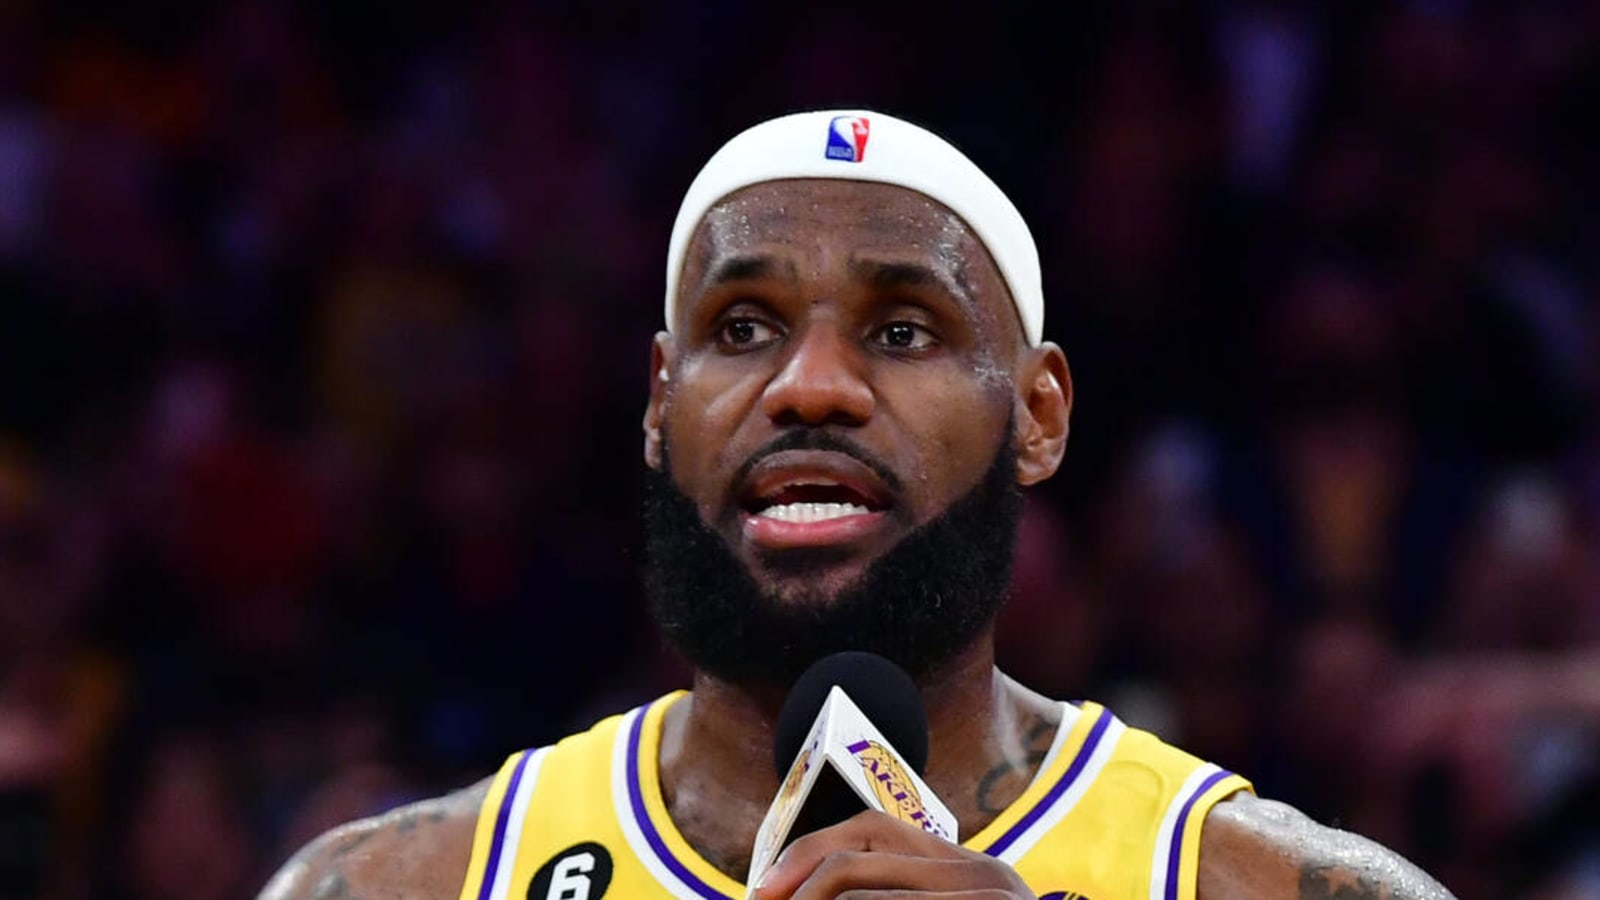 LeBron's foot injury reached 'unbearable point' while breaking record